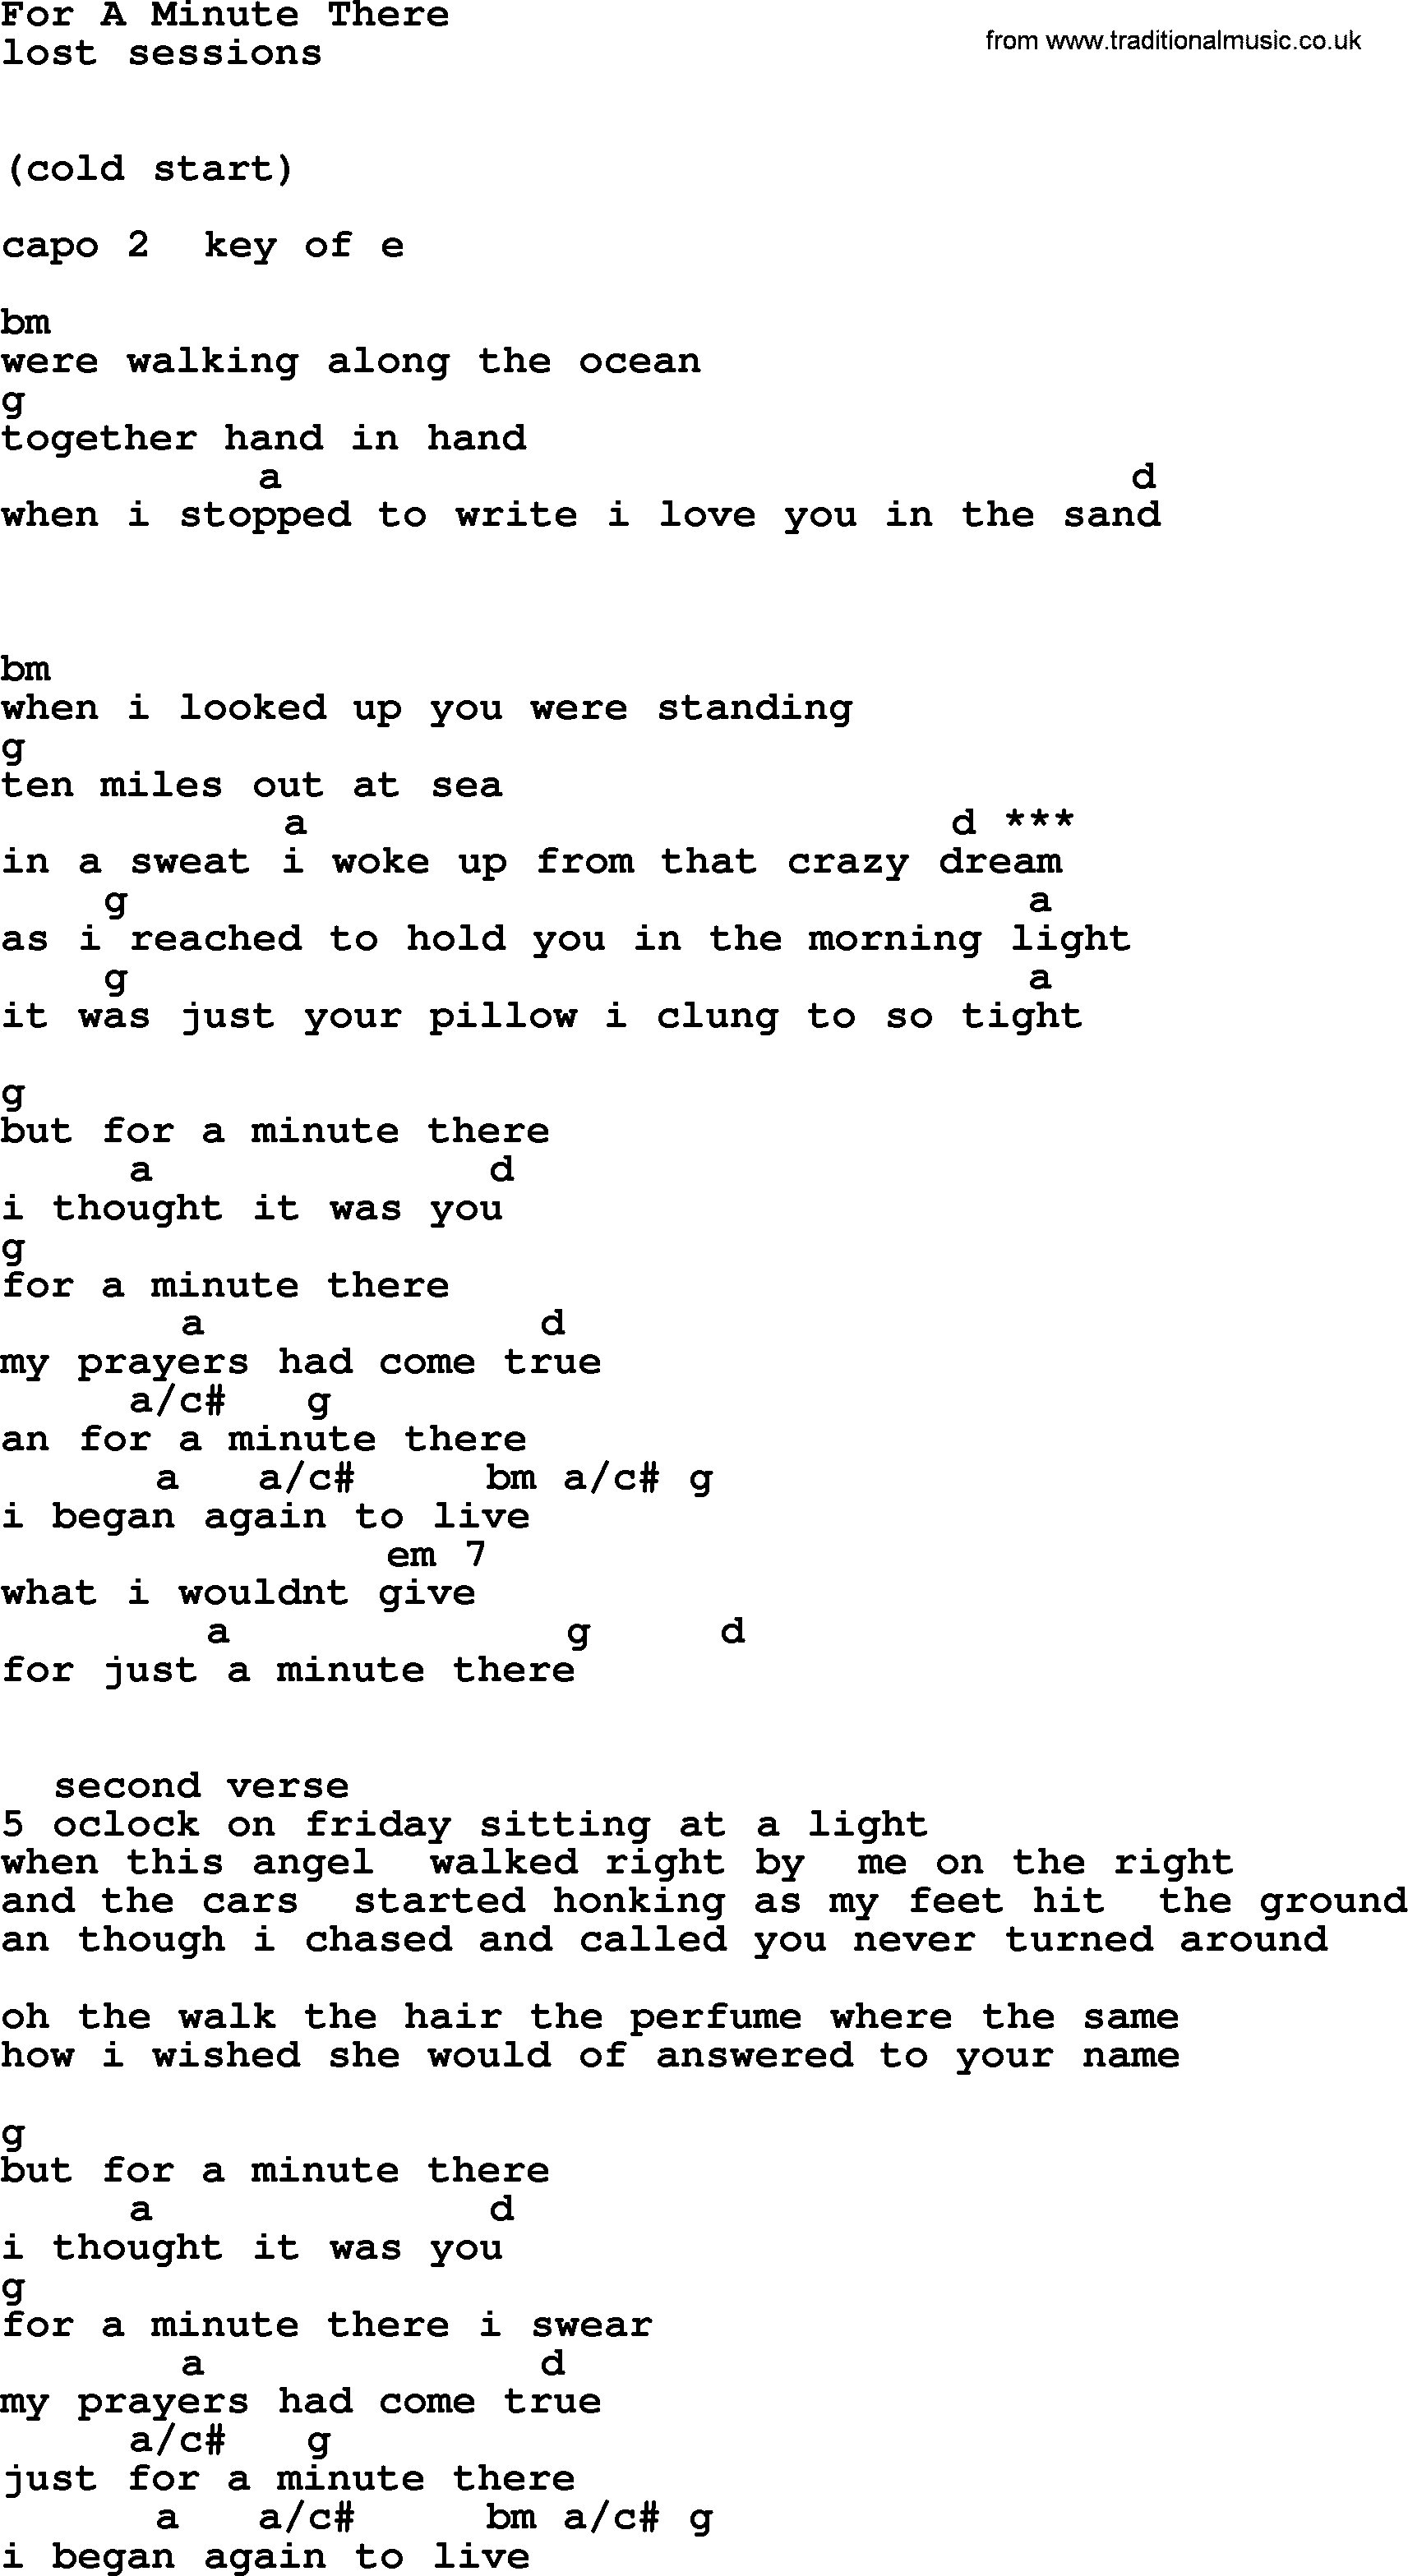 Garth Brooks song: For A Minute There, lyrics and chords